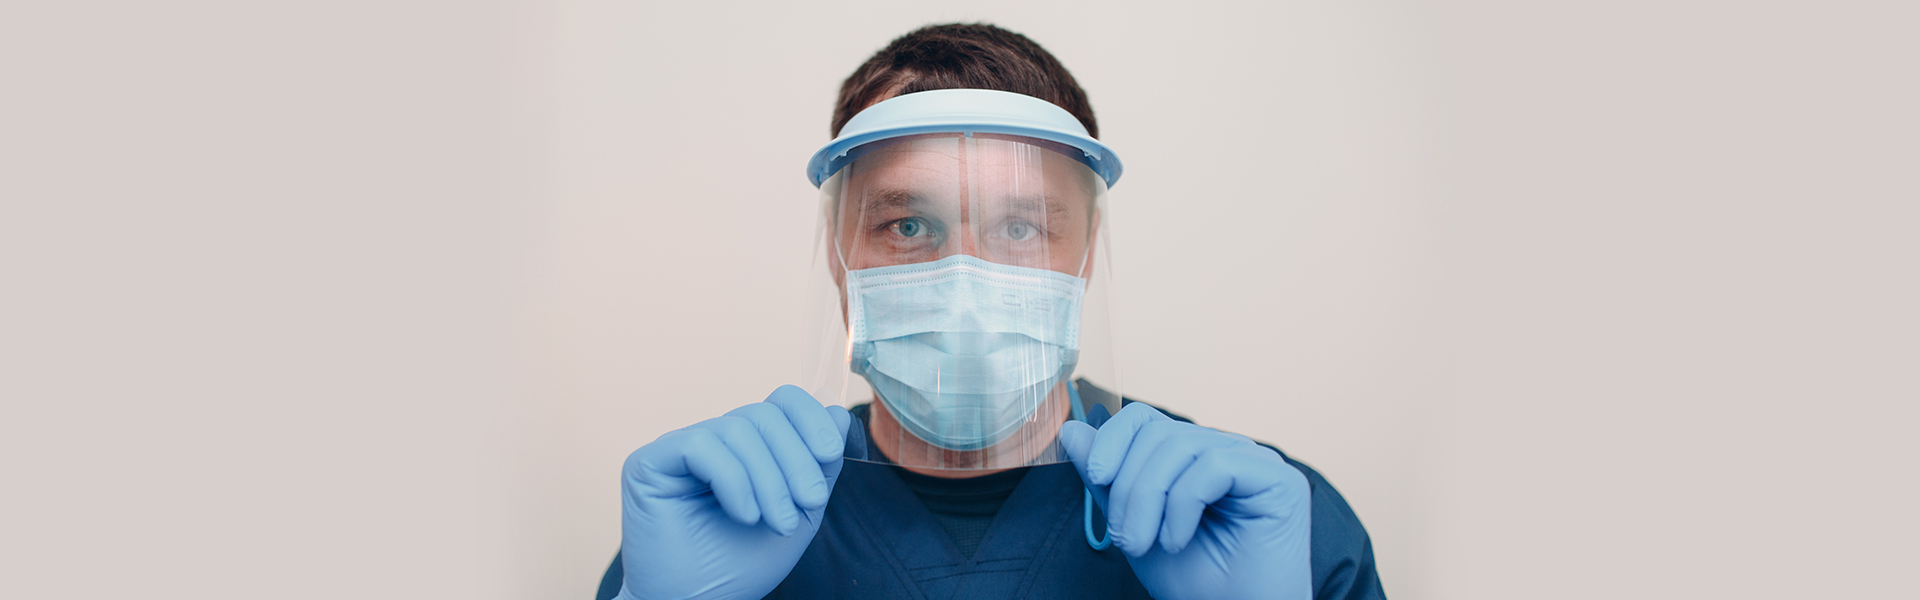 Managing Dental Health During The COVID-19 Pandemic 